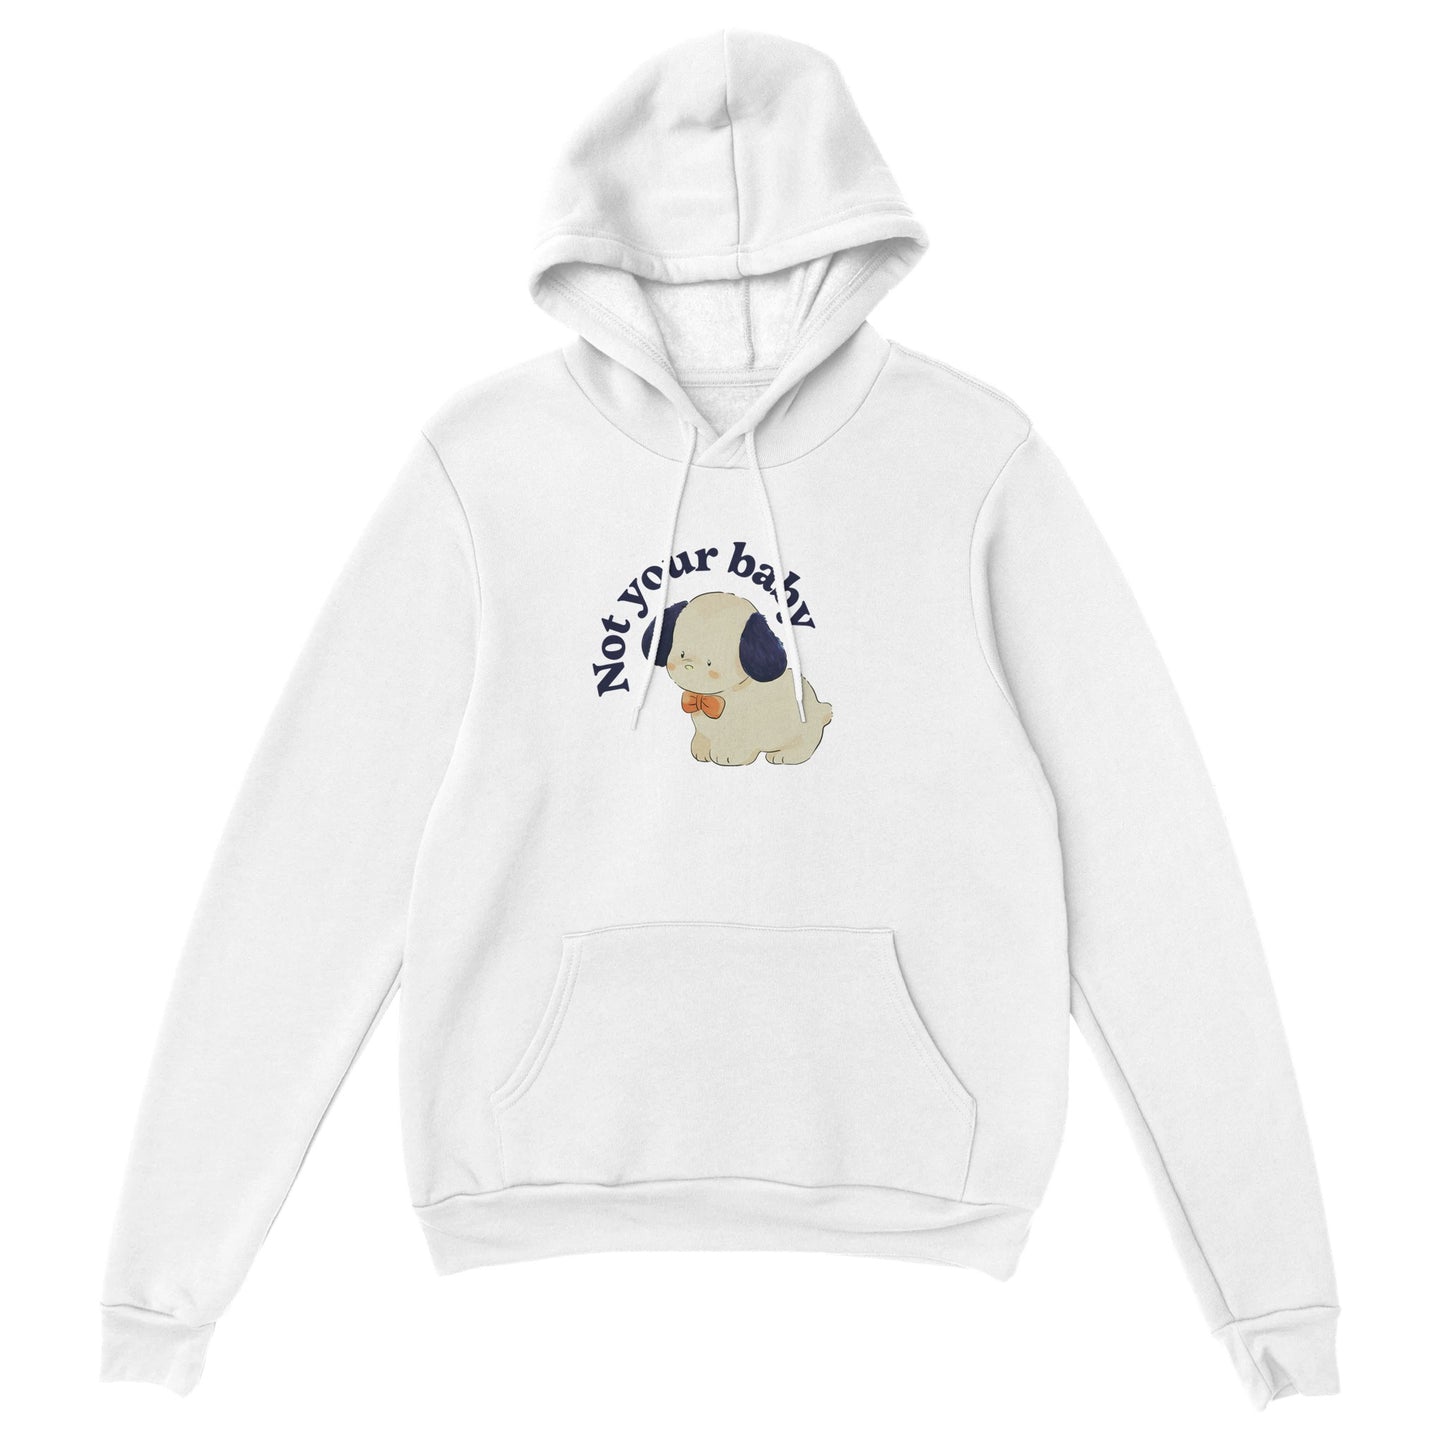 Not Your Baby Hoodie